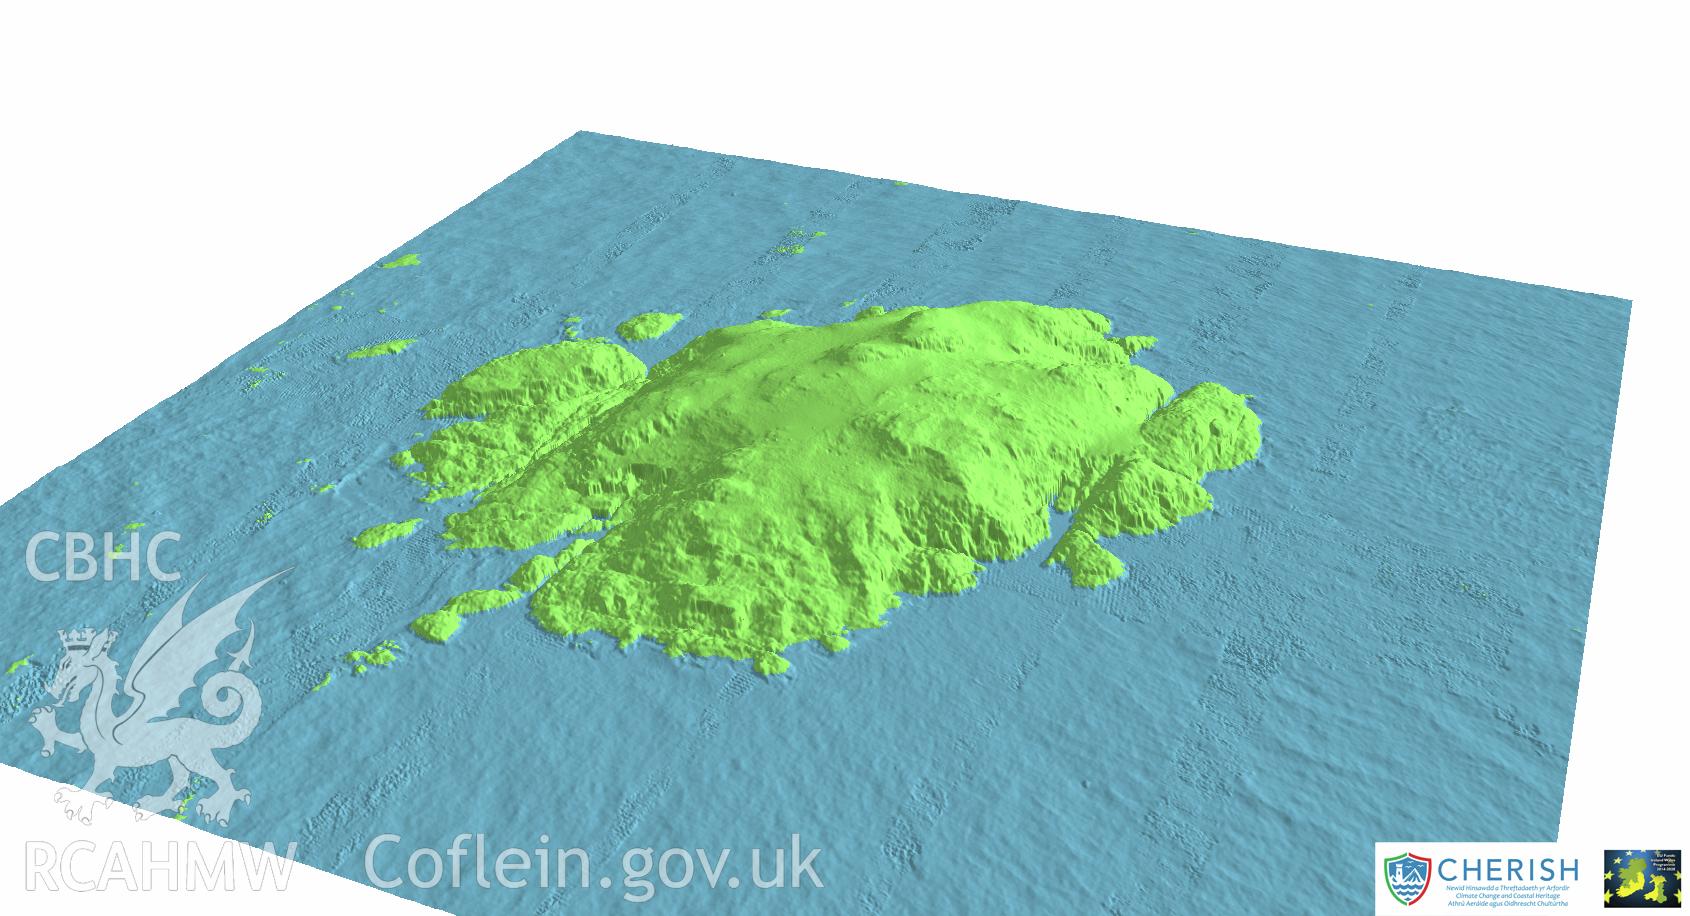 Ynys Gwales (Grassholm Island). Airborne laser scanning (LiDAR) commissioned by the CHERISH Project 2017-2021, flown by Bluesky International LTD at low tide on 24th February 2017. View showing Grassholm Island facing north-west.